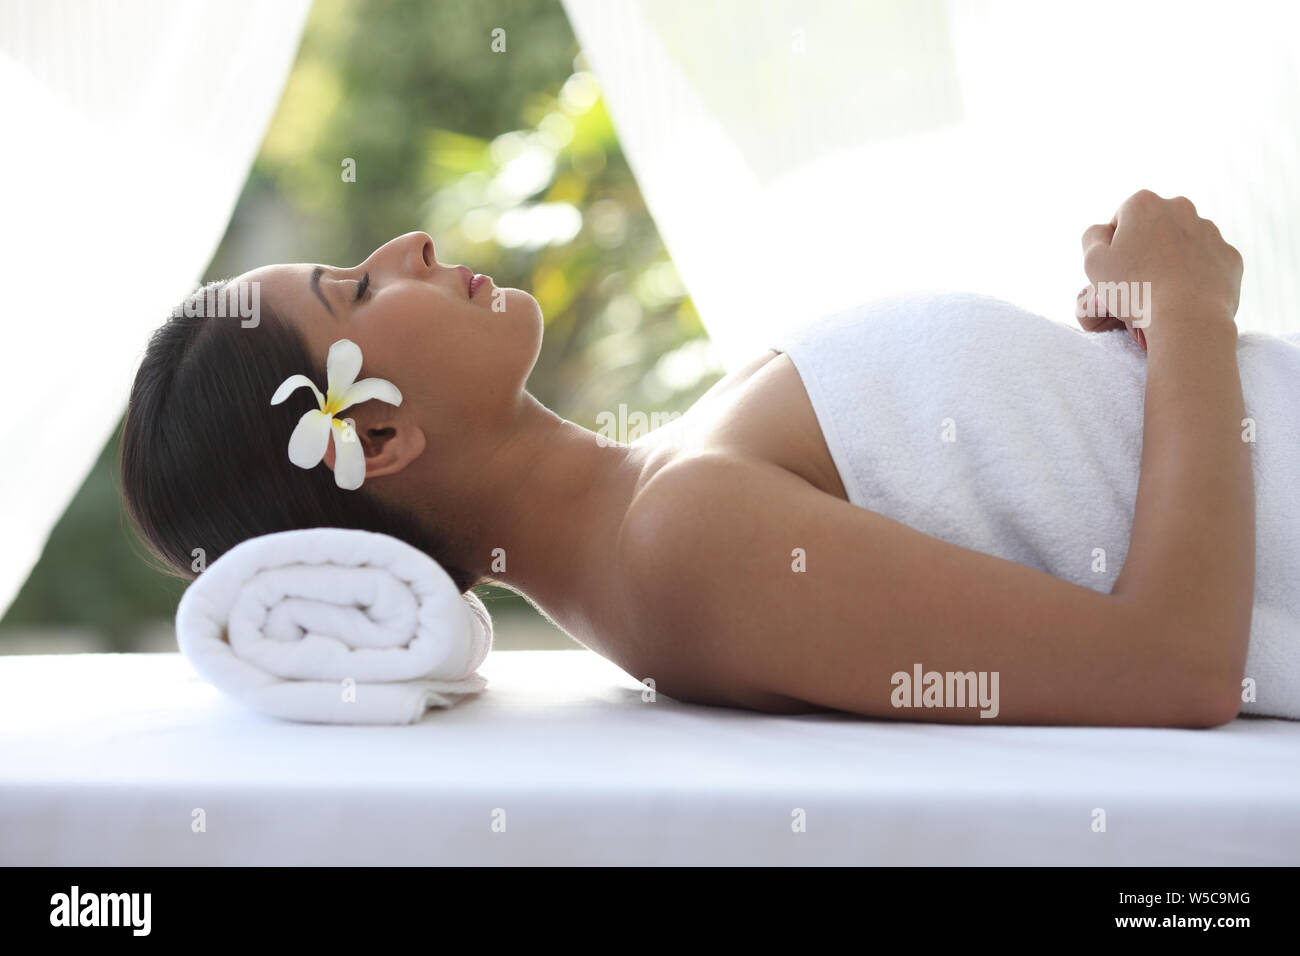 Woman relaxing on a massage table Stock Photo